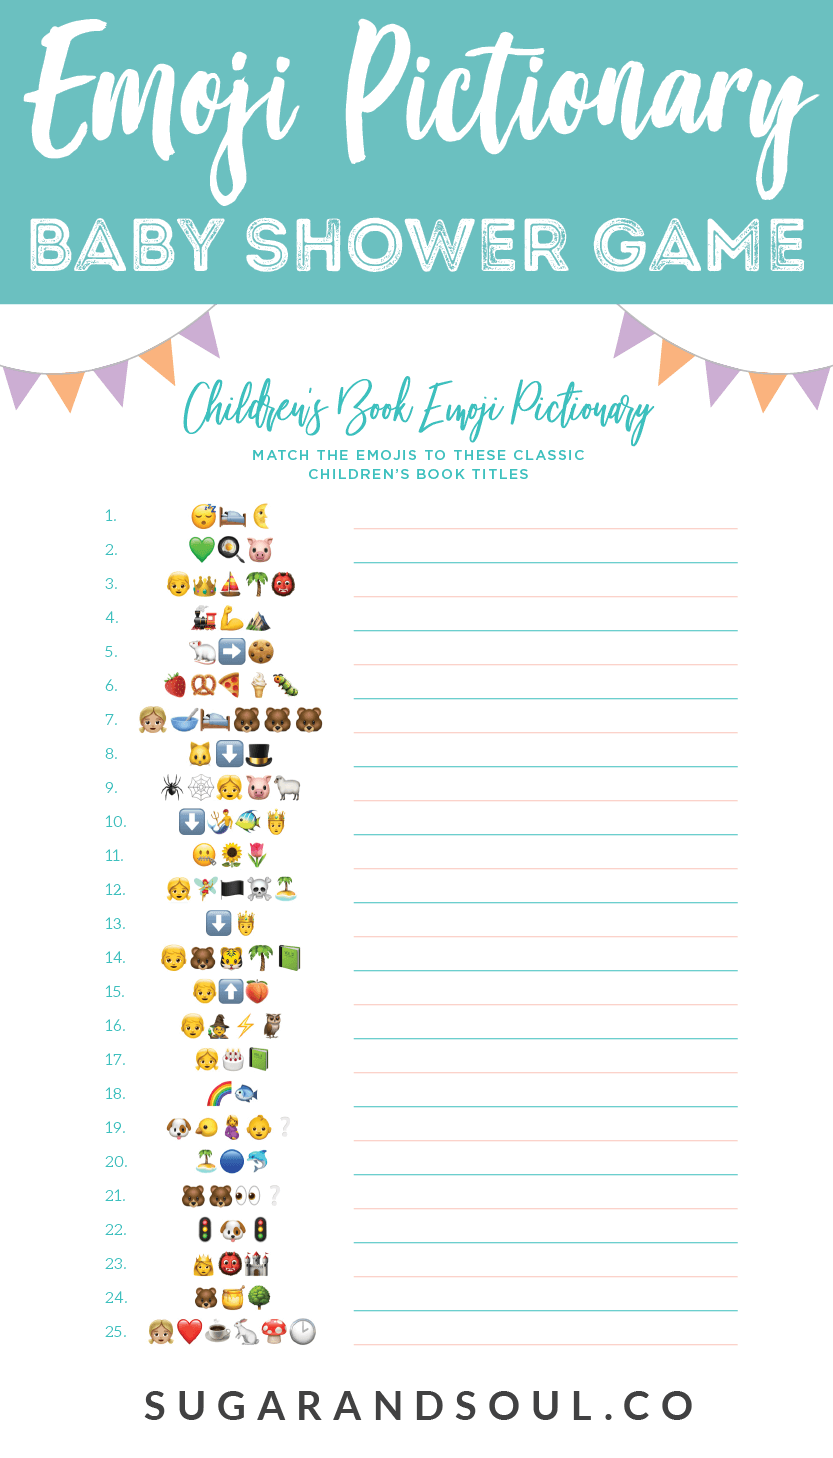 This FREE Emoji Pictionary Baby Shower Game Printable uses emoji images to guess the name of each book! It's a fun and new game idea everyone will love playing!